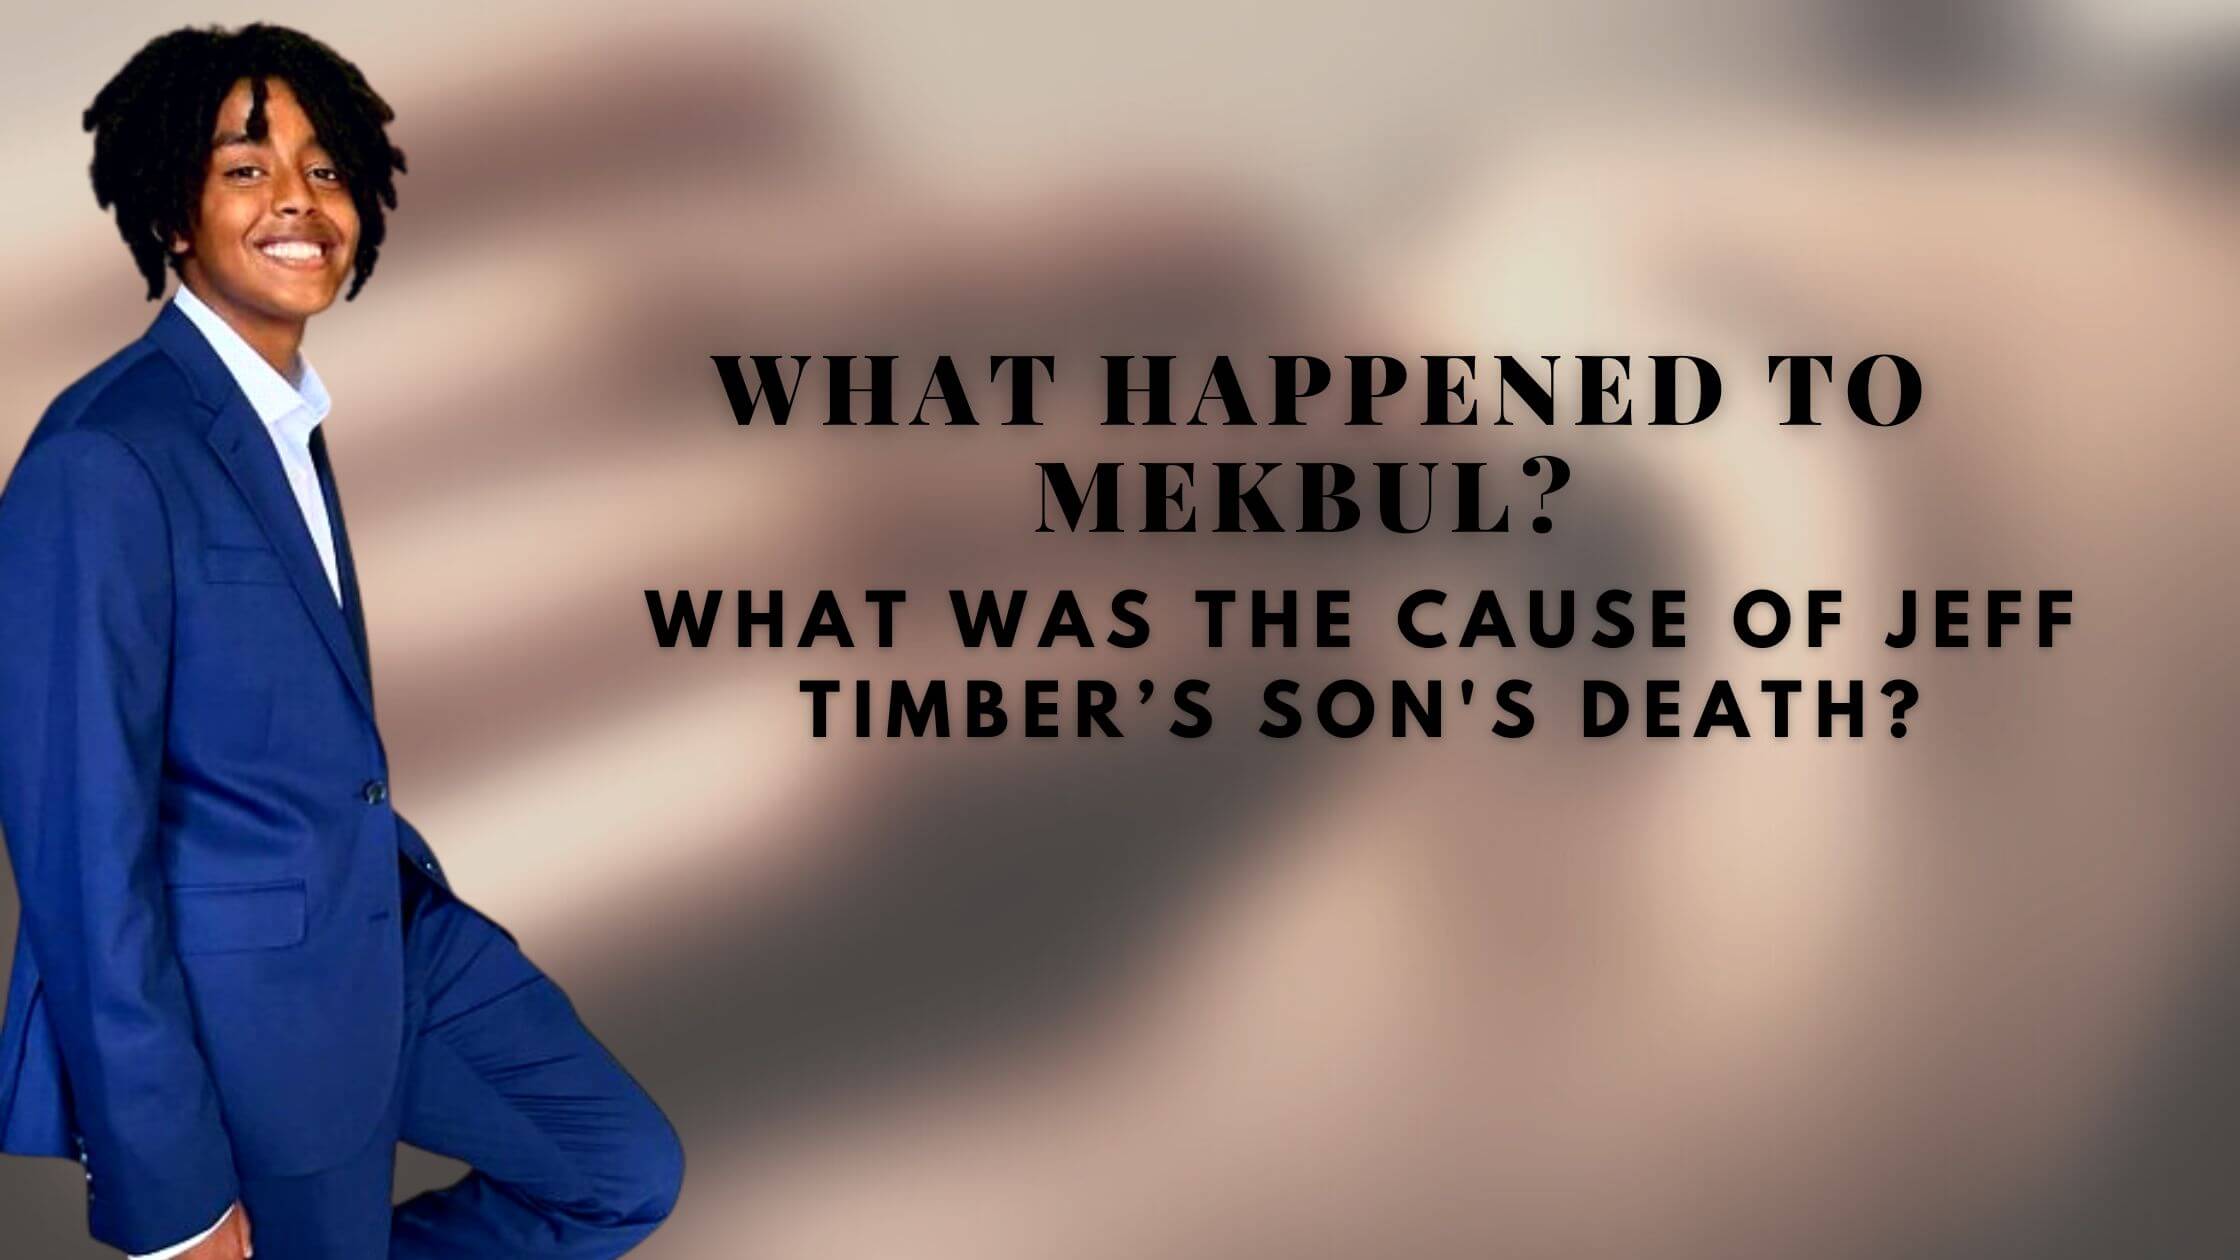 What Happened To Mekbul What Was The Cause Of Jeff Timber’s Son's Death